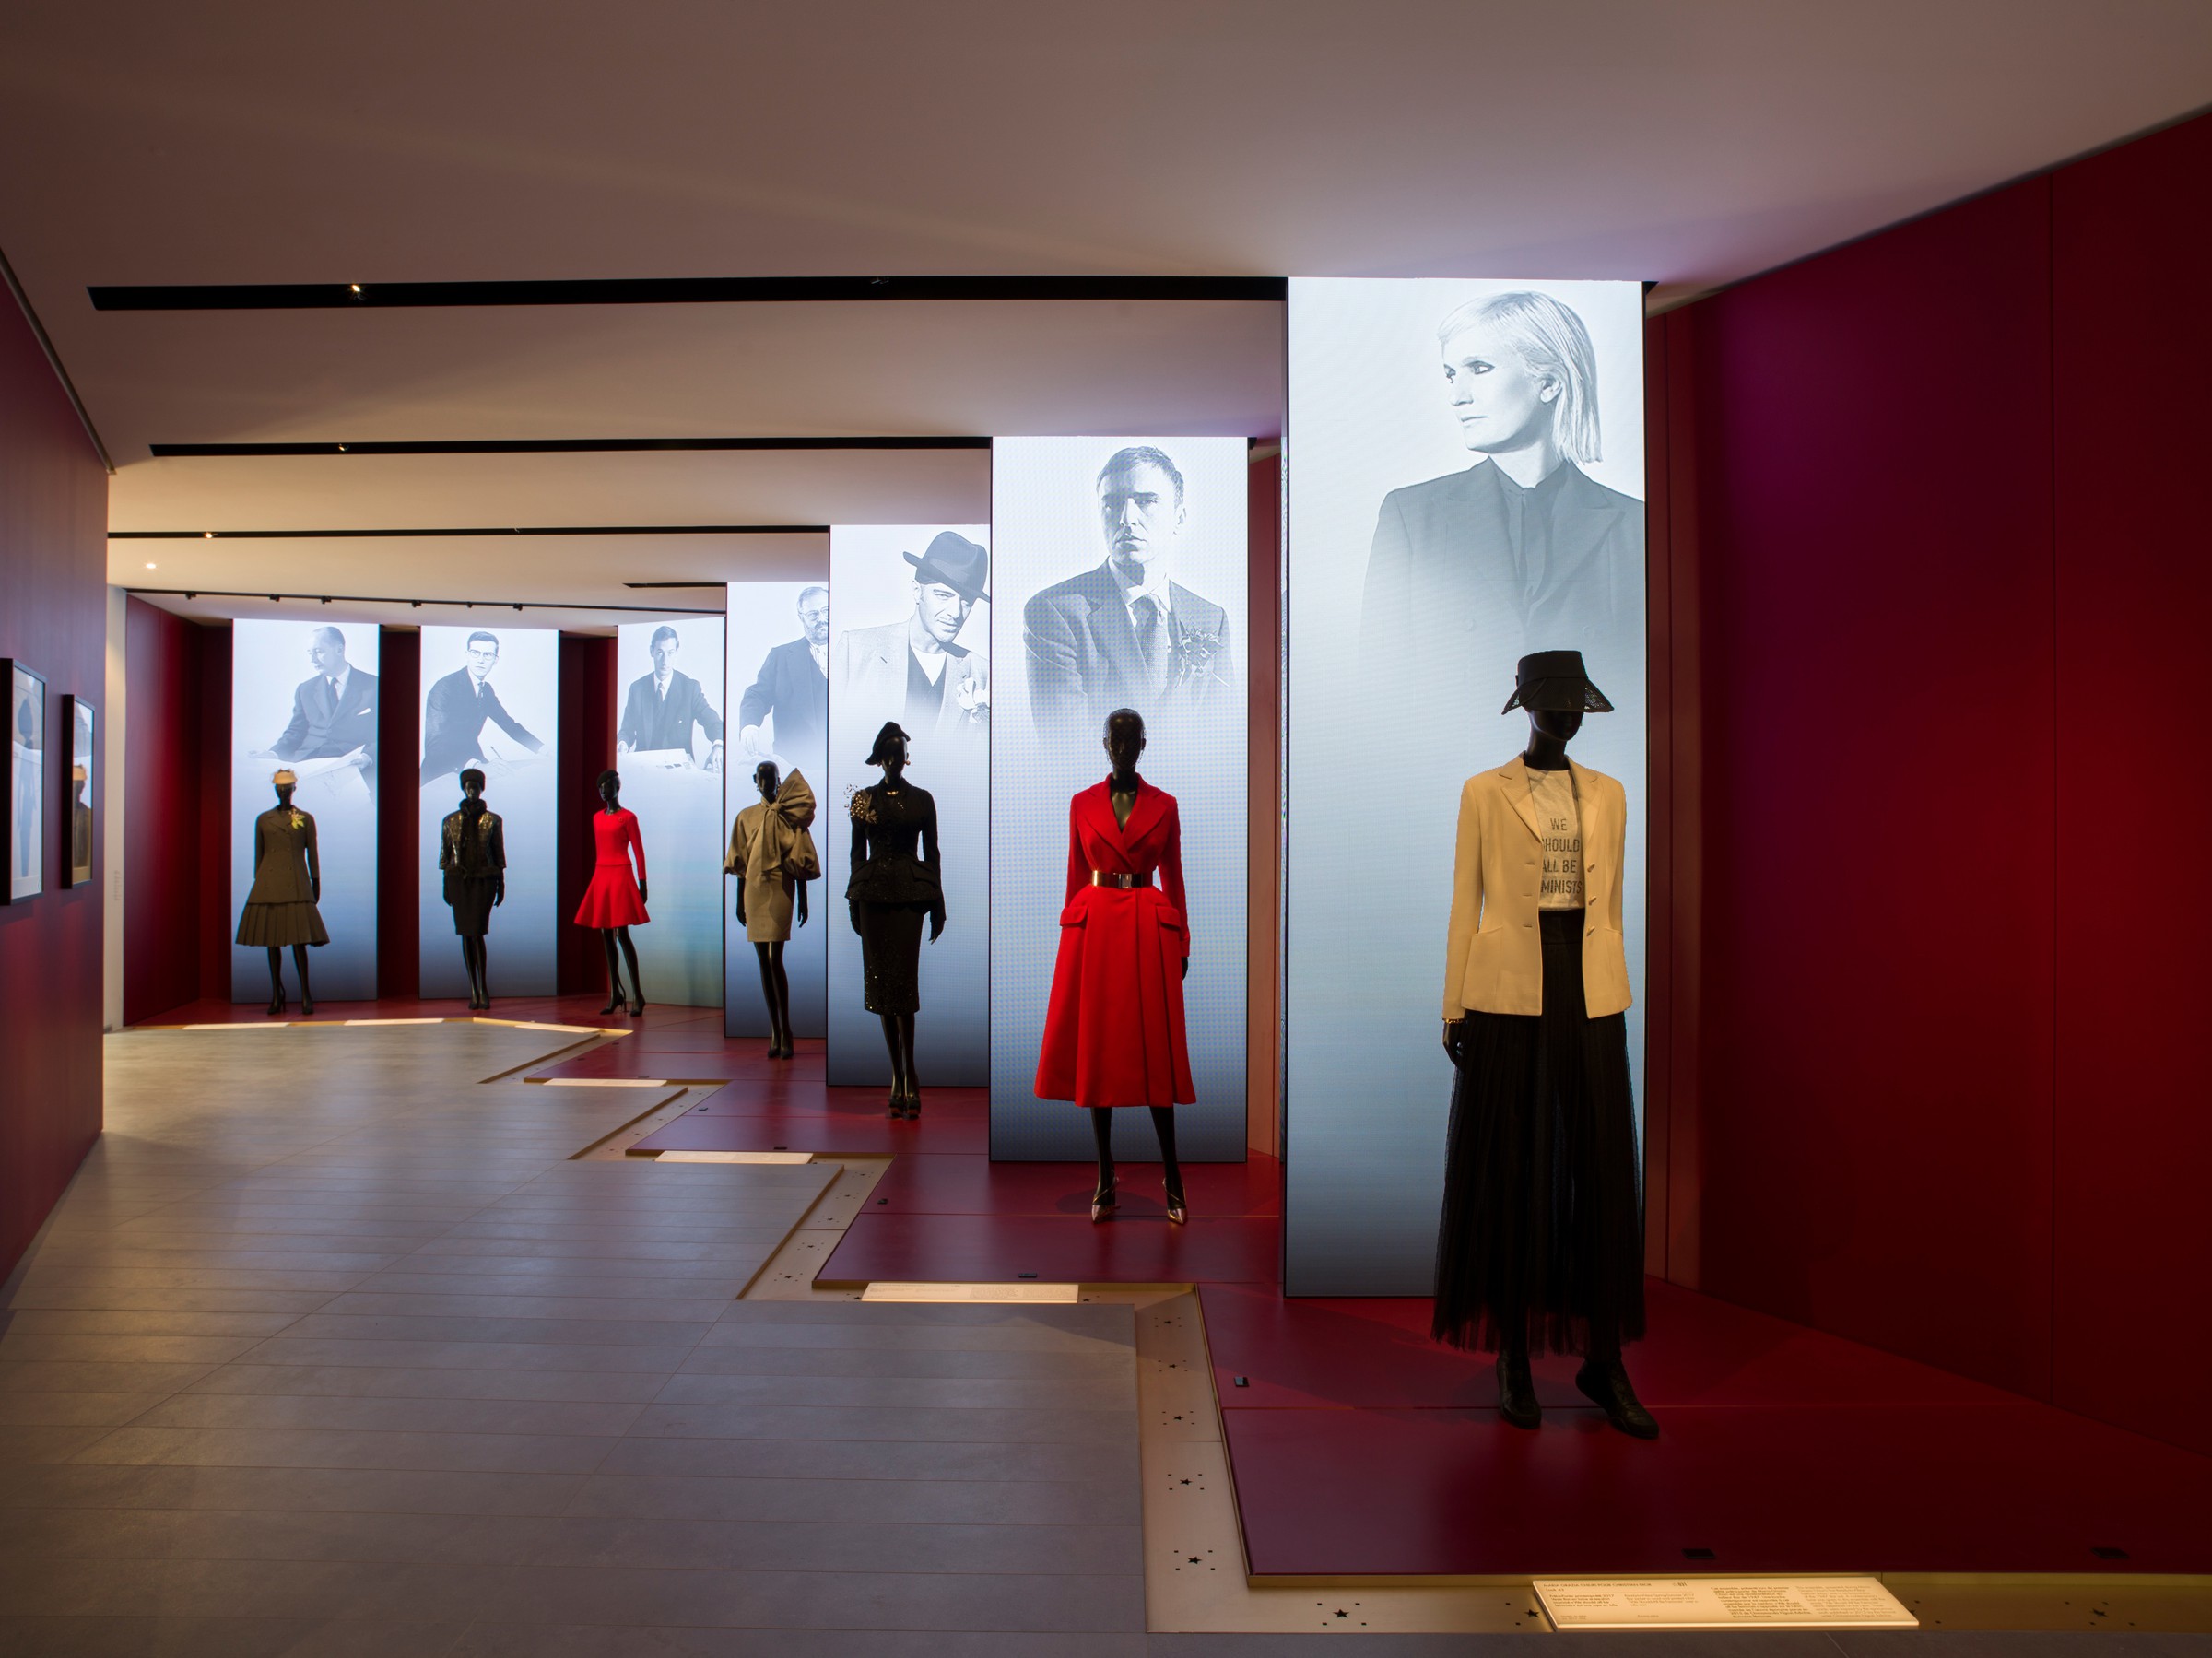 La Galerie Dior 30 Montaigne opens its doors and displays the creations of  fashion designer Christian Dior and his six successors